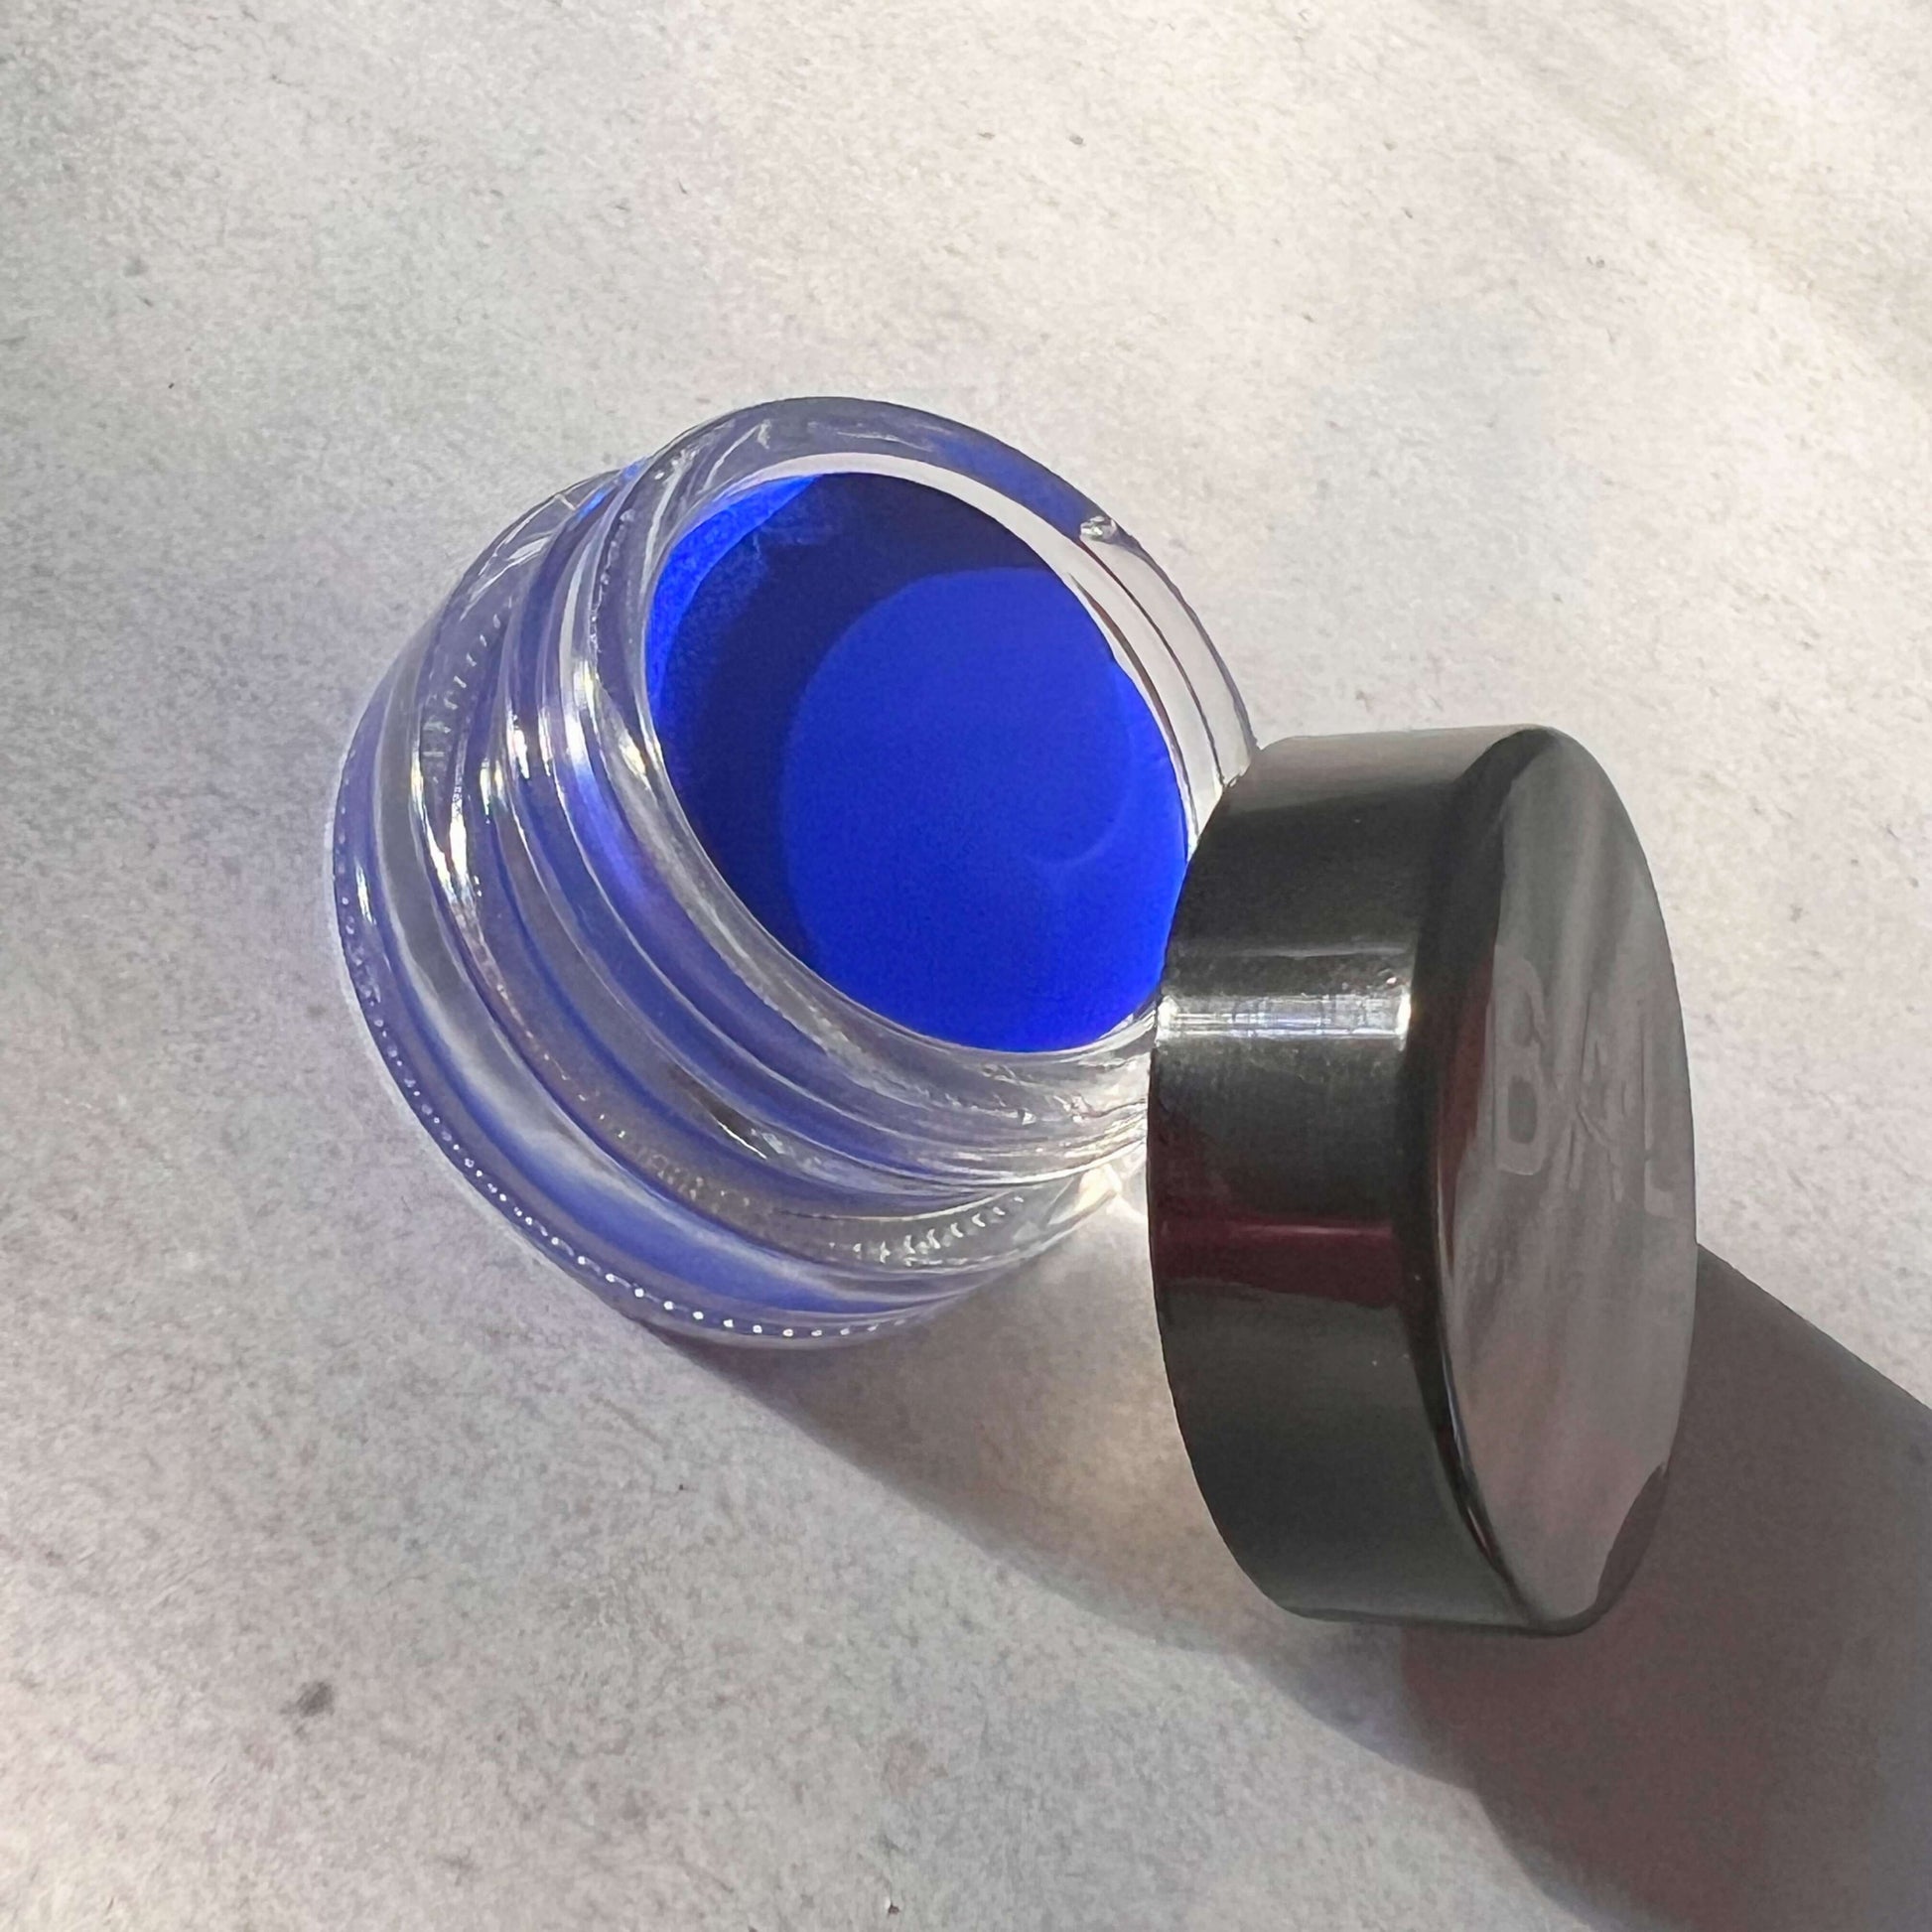 The Lid rests on the side of the blue eyeliner gel pot showing a creamy consistency.